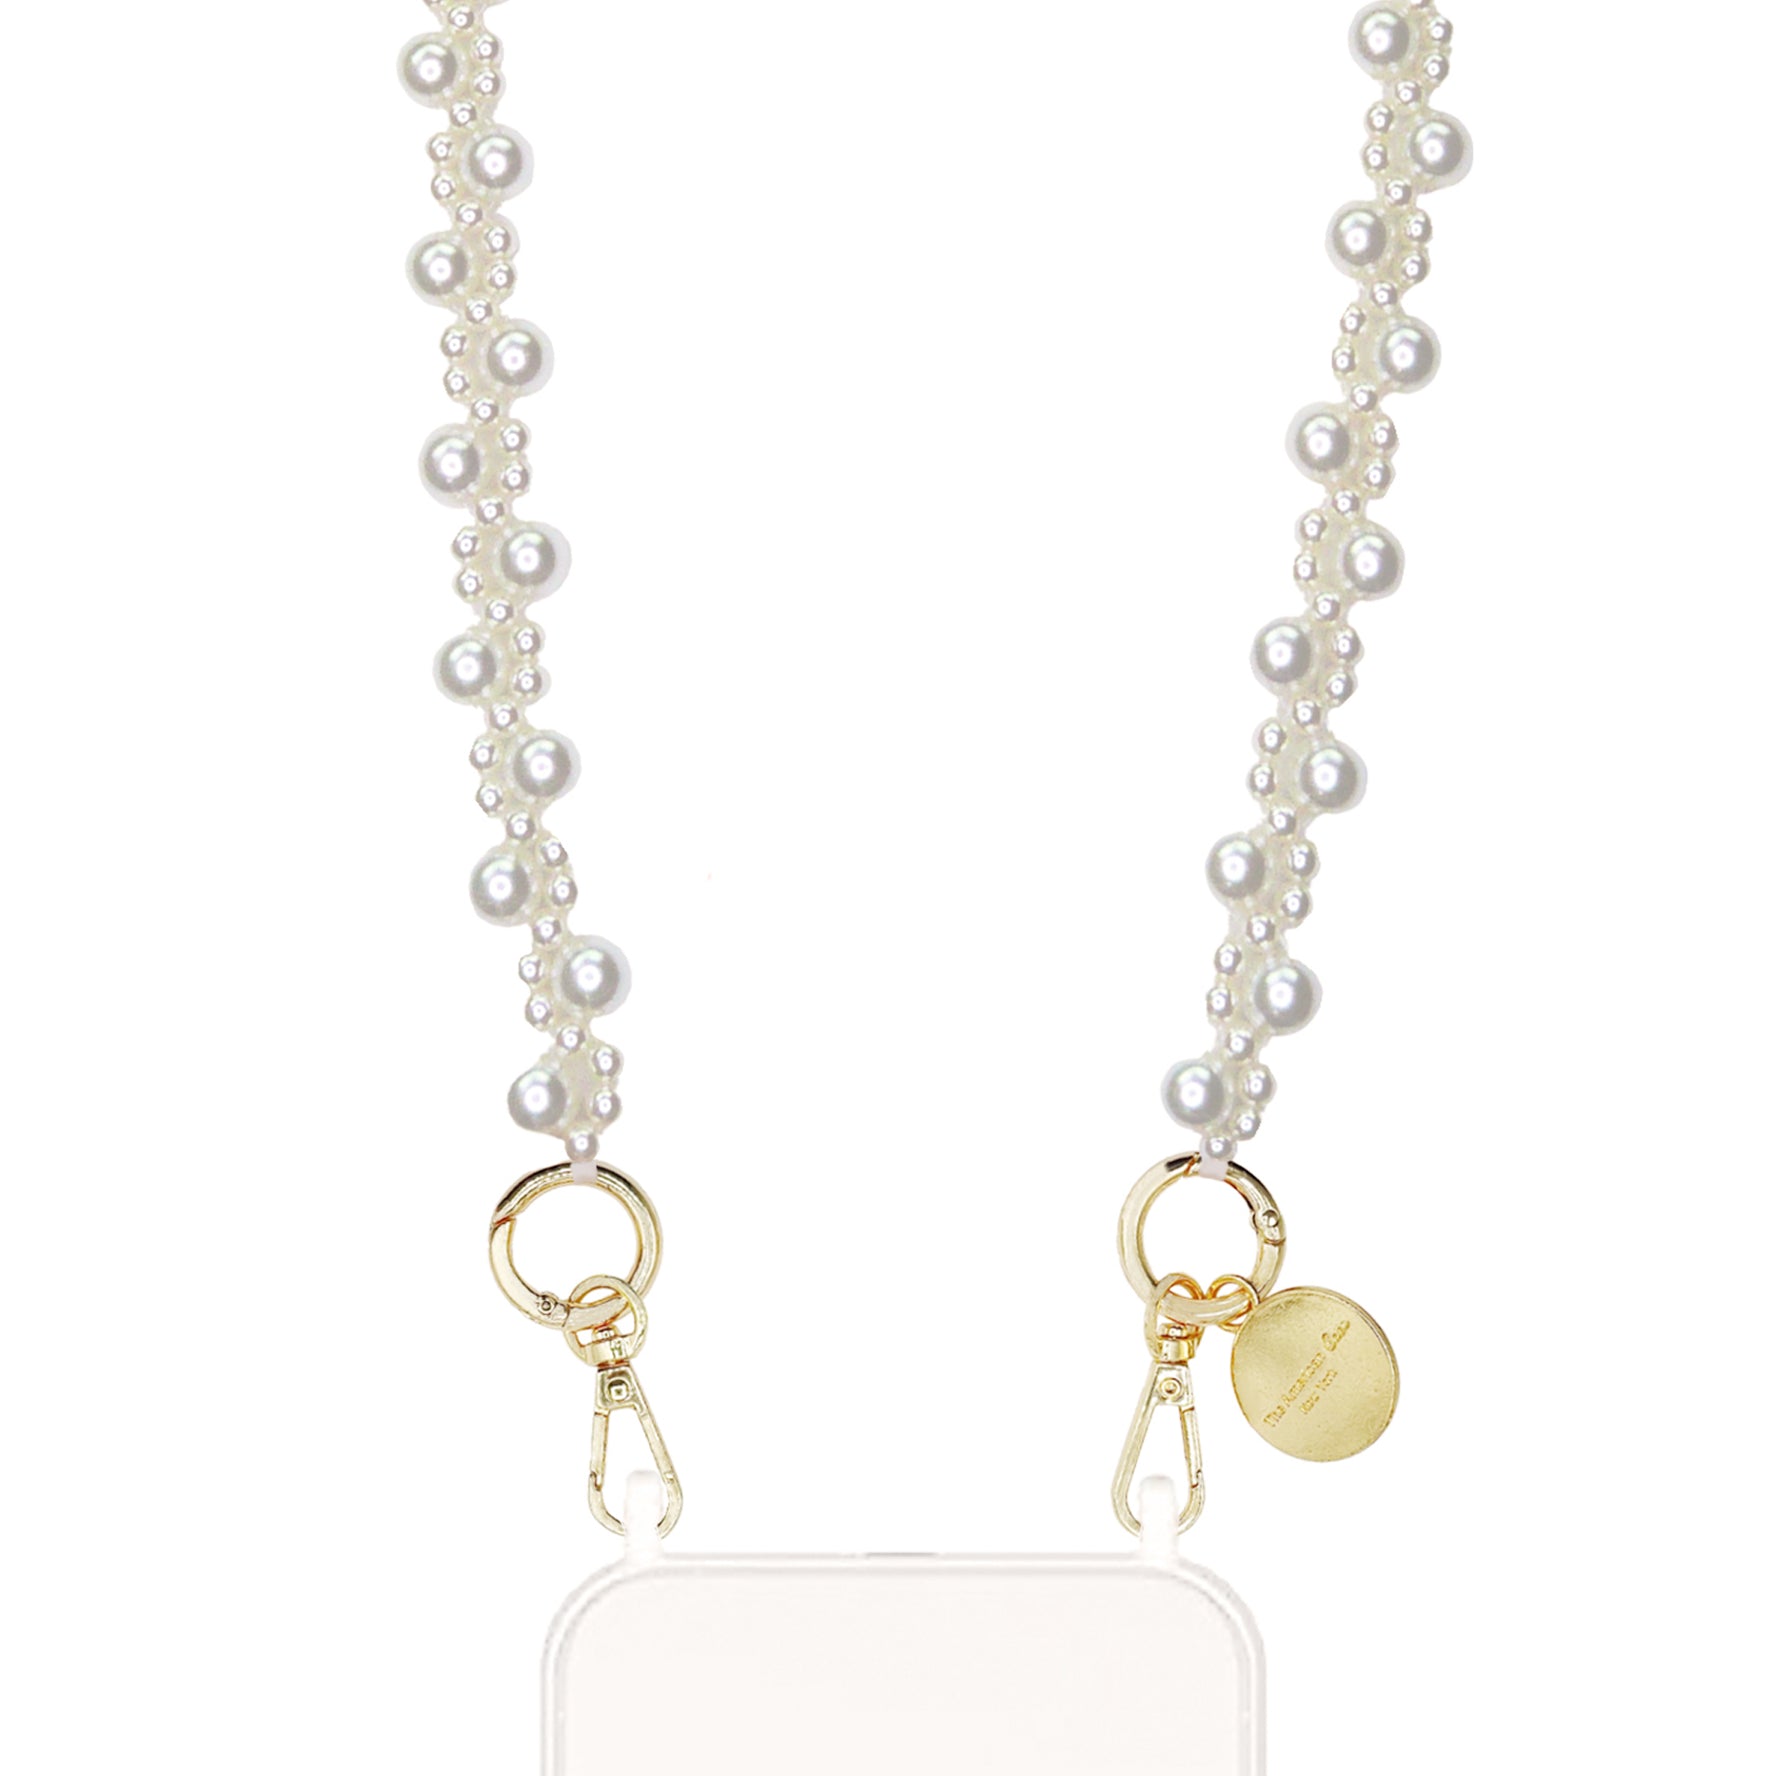 Ariel - Crossbody Multi-Sized Pearl Chain with Gold Carabiners